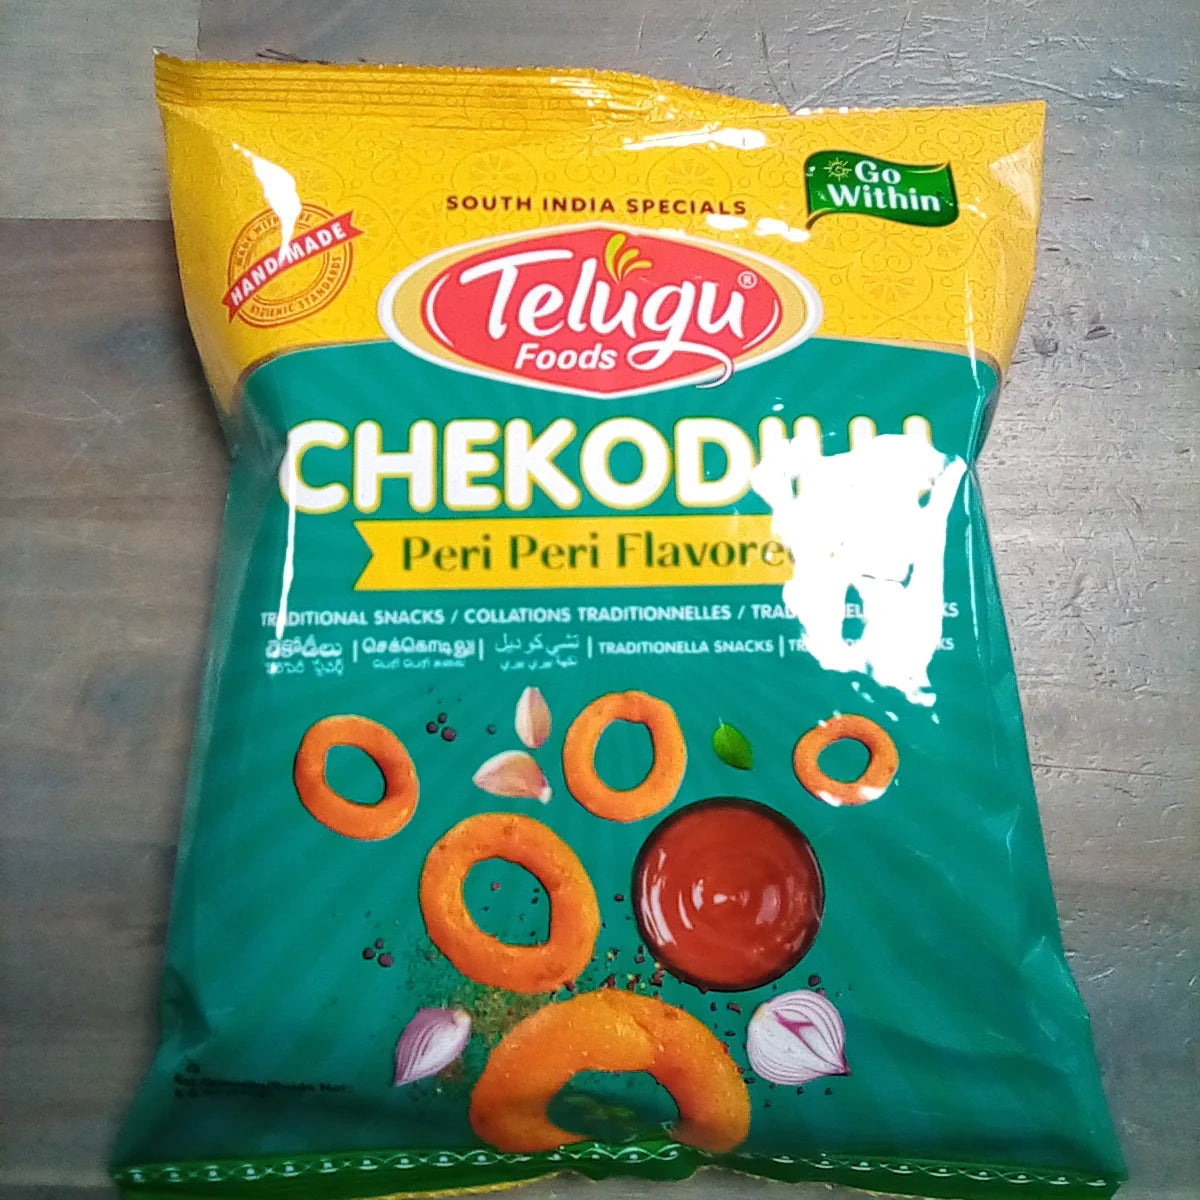 Telugu Foods Chekodilu - Peri Peri Flavored, 170 g, BUY 1 GET 1 FREE, Mix N Match - Add Your 2nd Pack to Cart